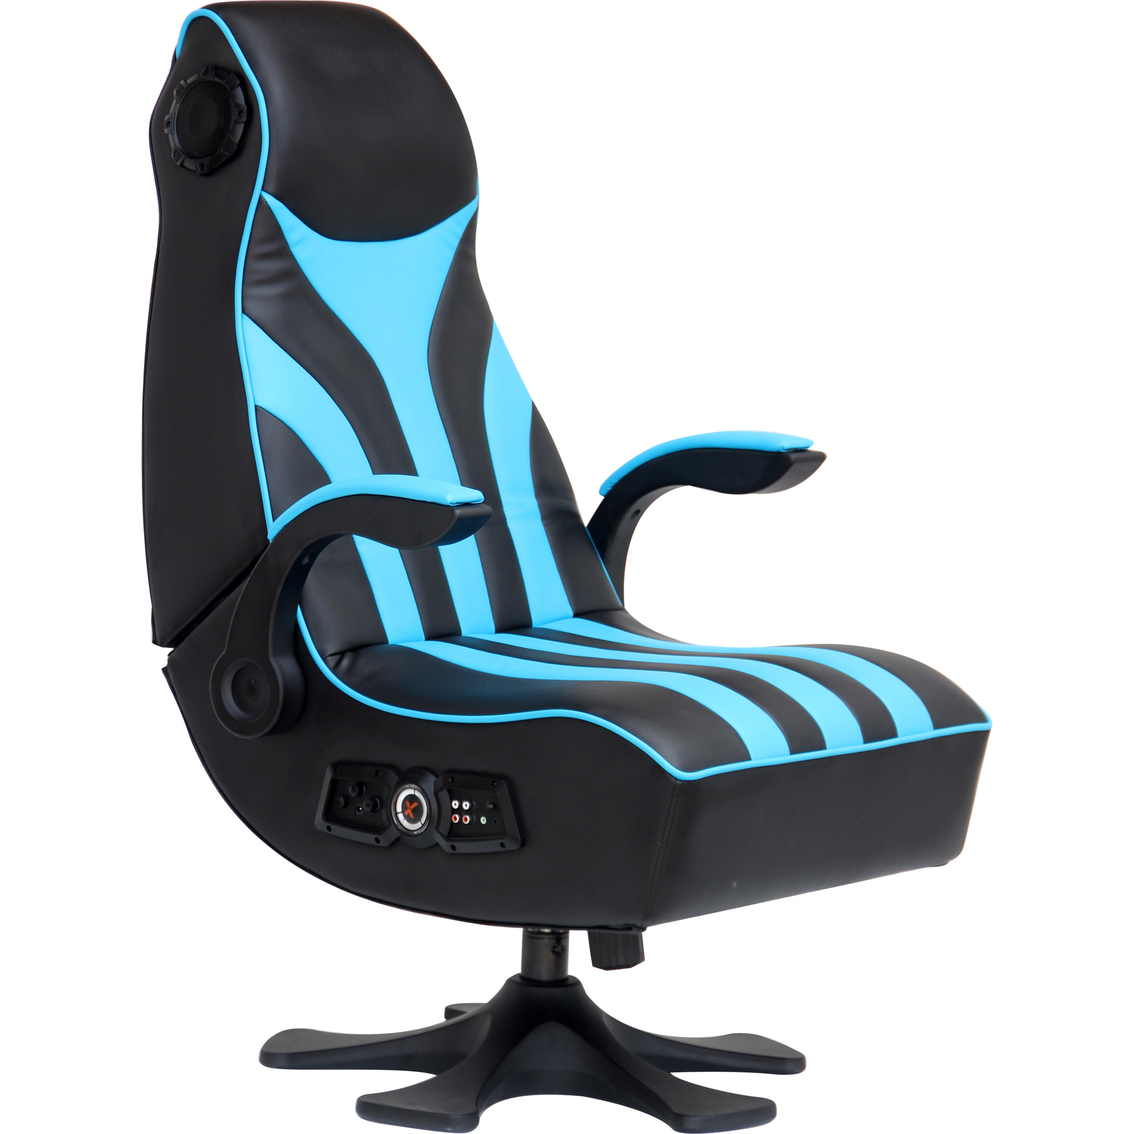 New Game Chair With Speakers And Vibration 